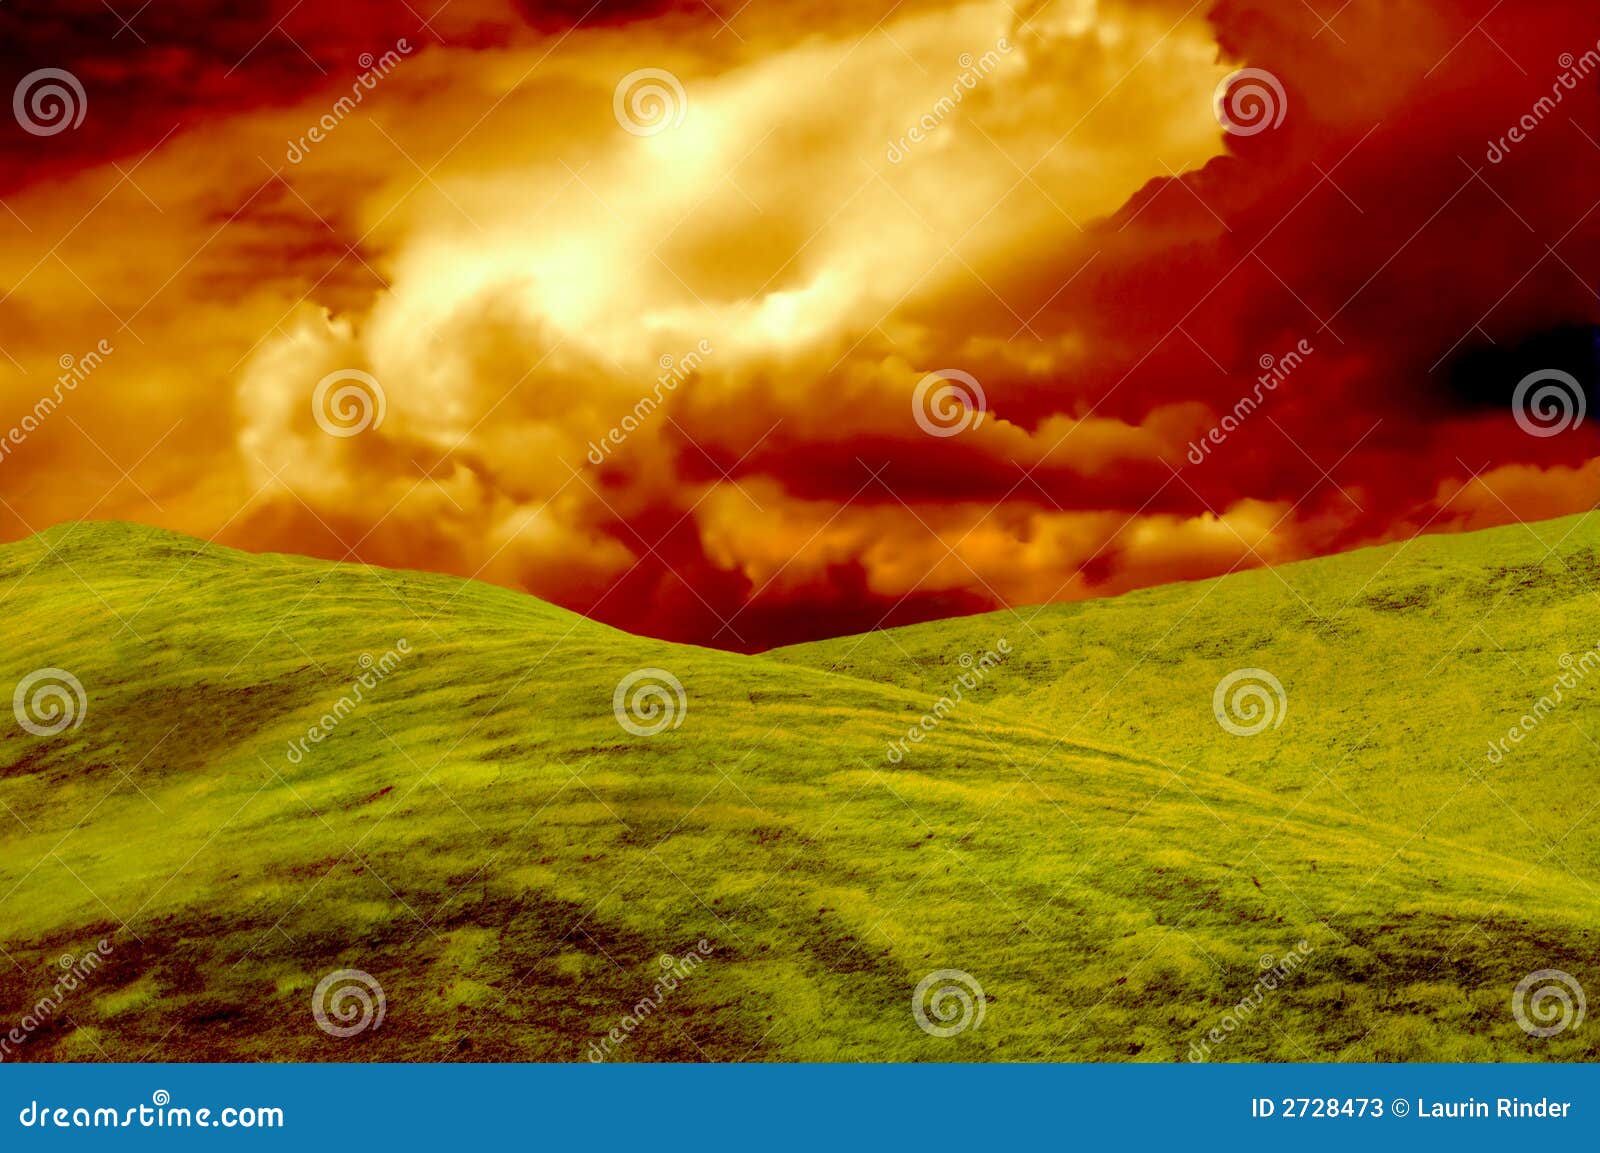 Grassy Knoll stock image. Image of grass, serenity, mountain - 2728473